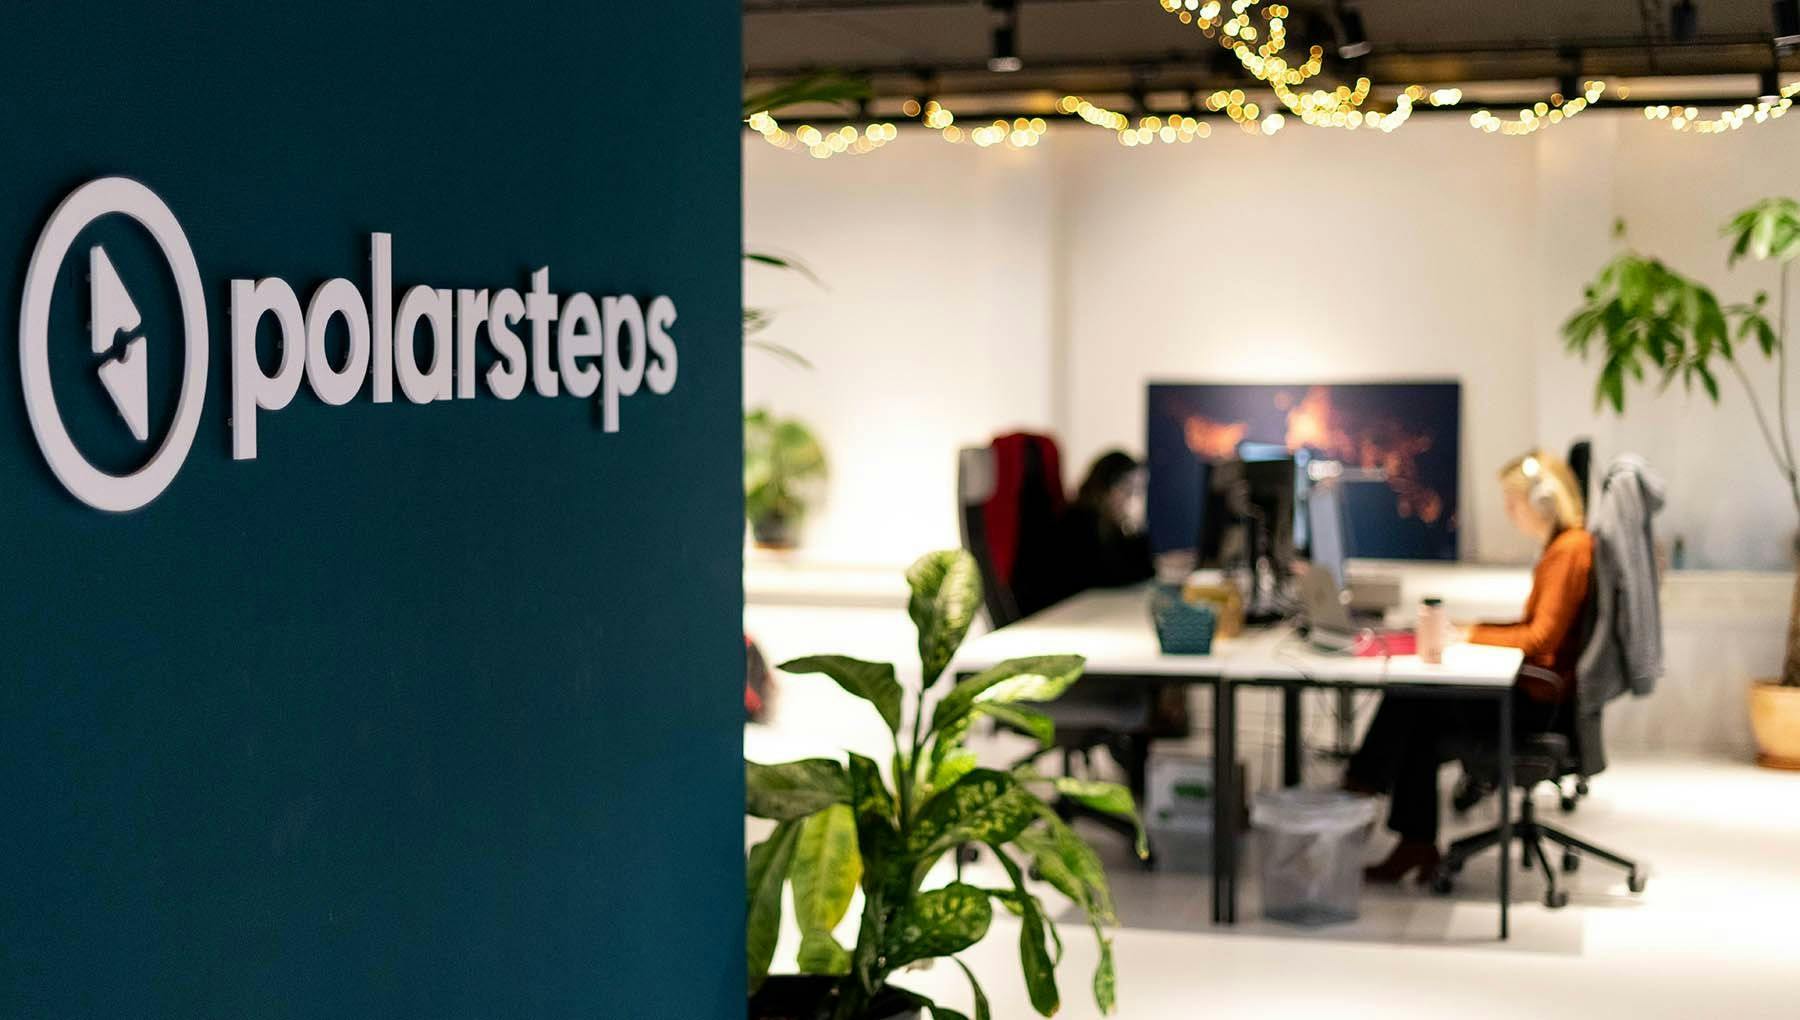 Polarsteps office with logo on the wall and desks in background.